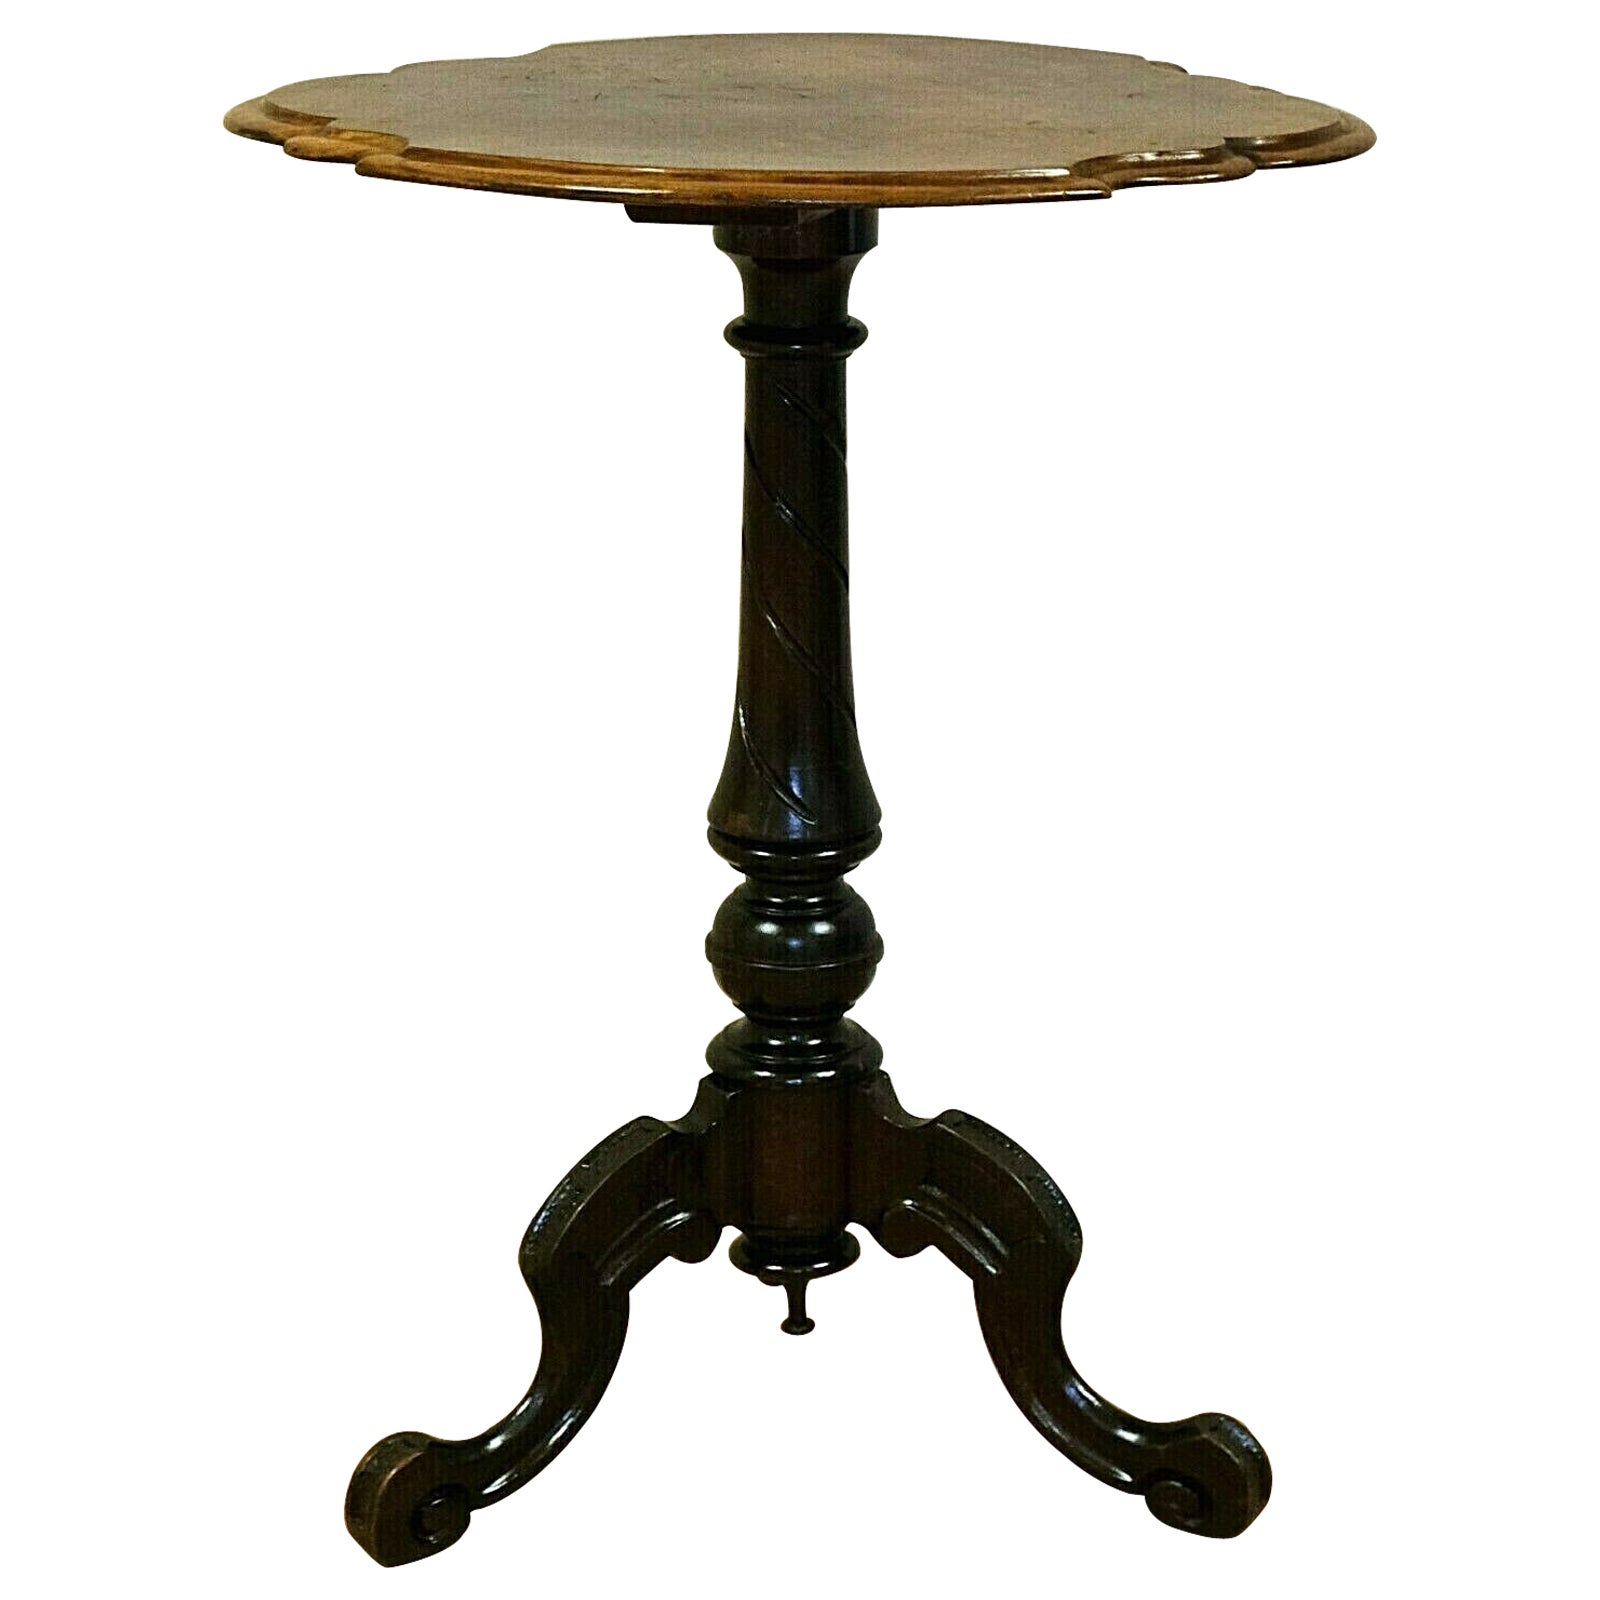 Victorian circa 1860 Burr Walnut Tripod Side End Table with Scalloped Edge For Sale